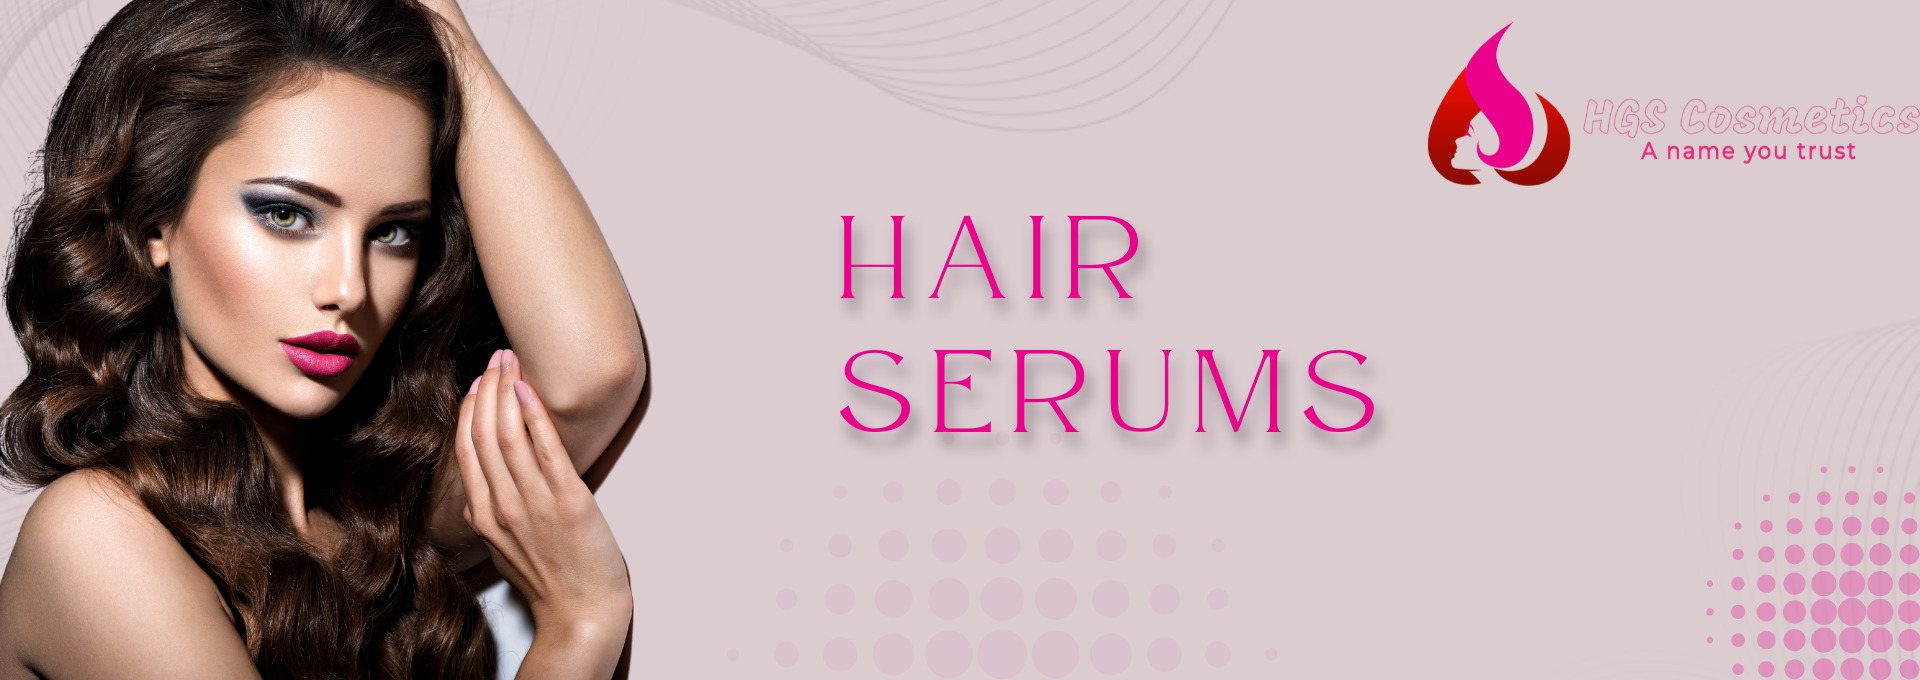 Shop Best Hair Serum products Online @ HGS Cosmetics